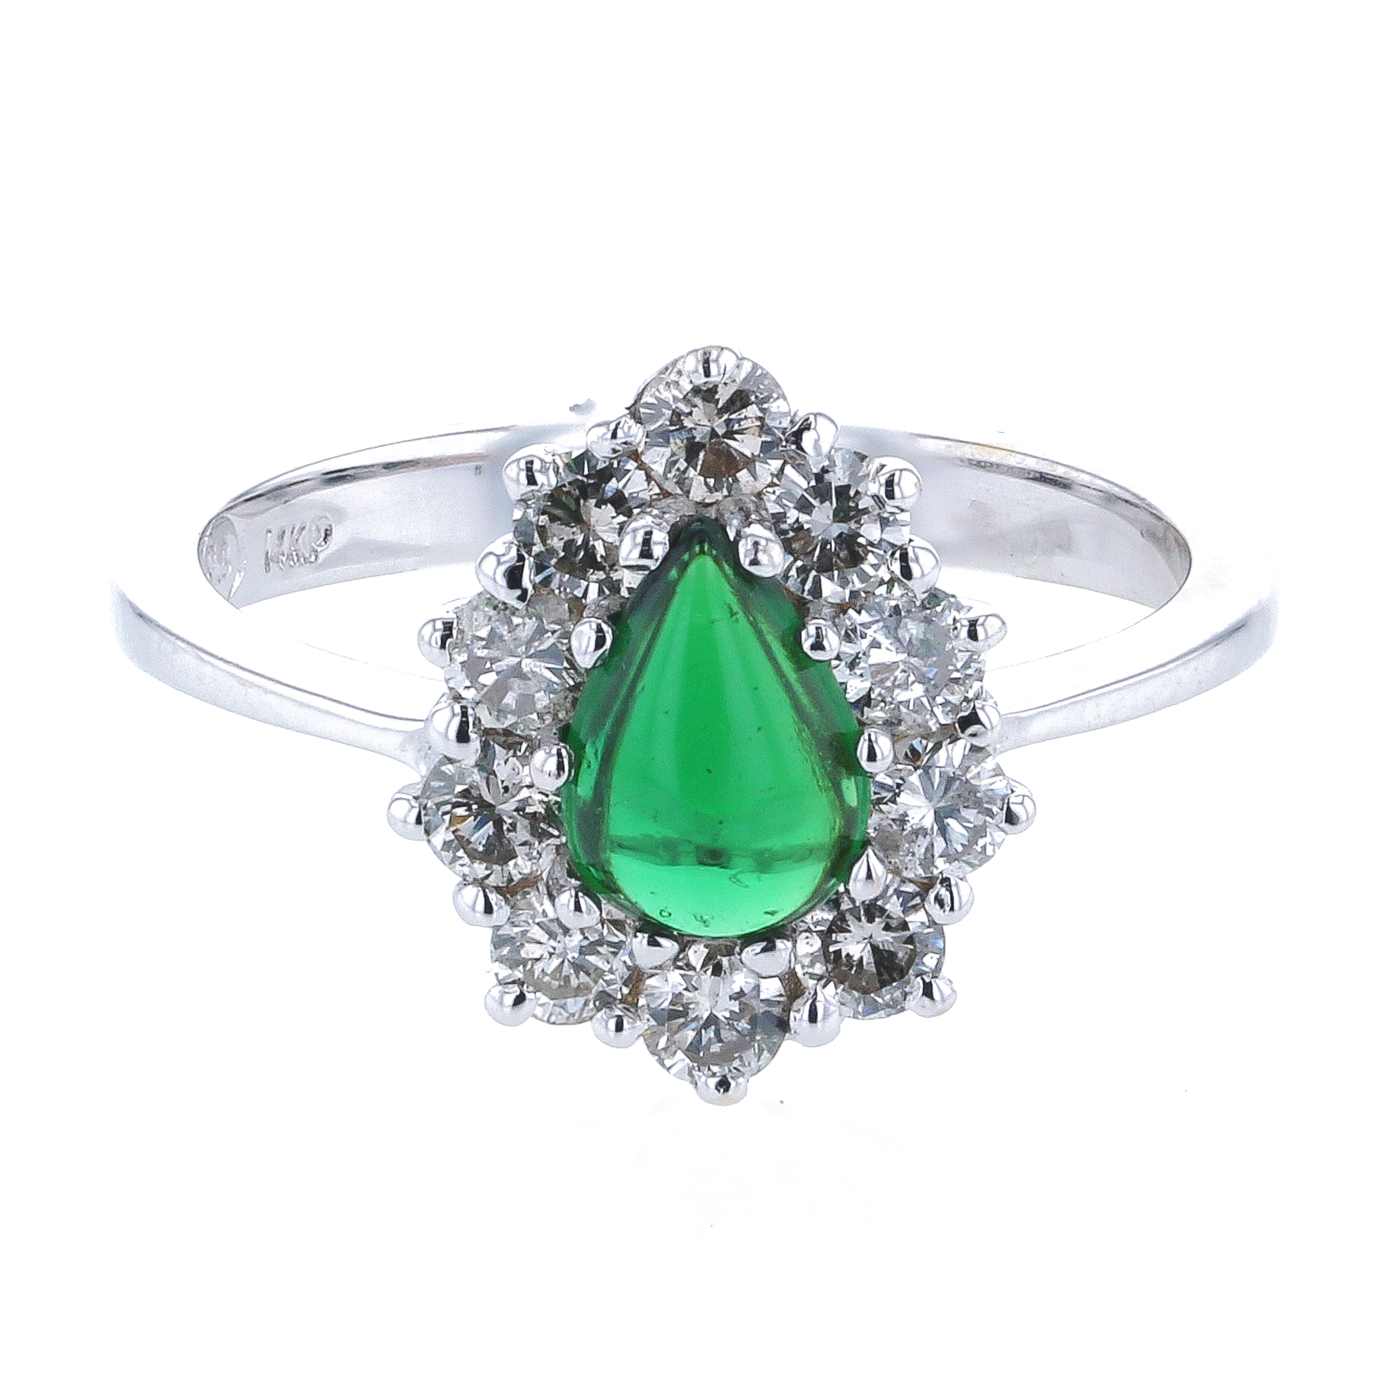 "The Emmy Diamond & Emerald Halo Ring" .60 CTW Emerald & .6 CTTW in 14K White Gold